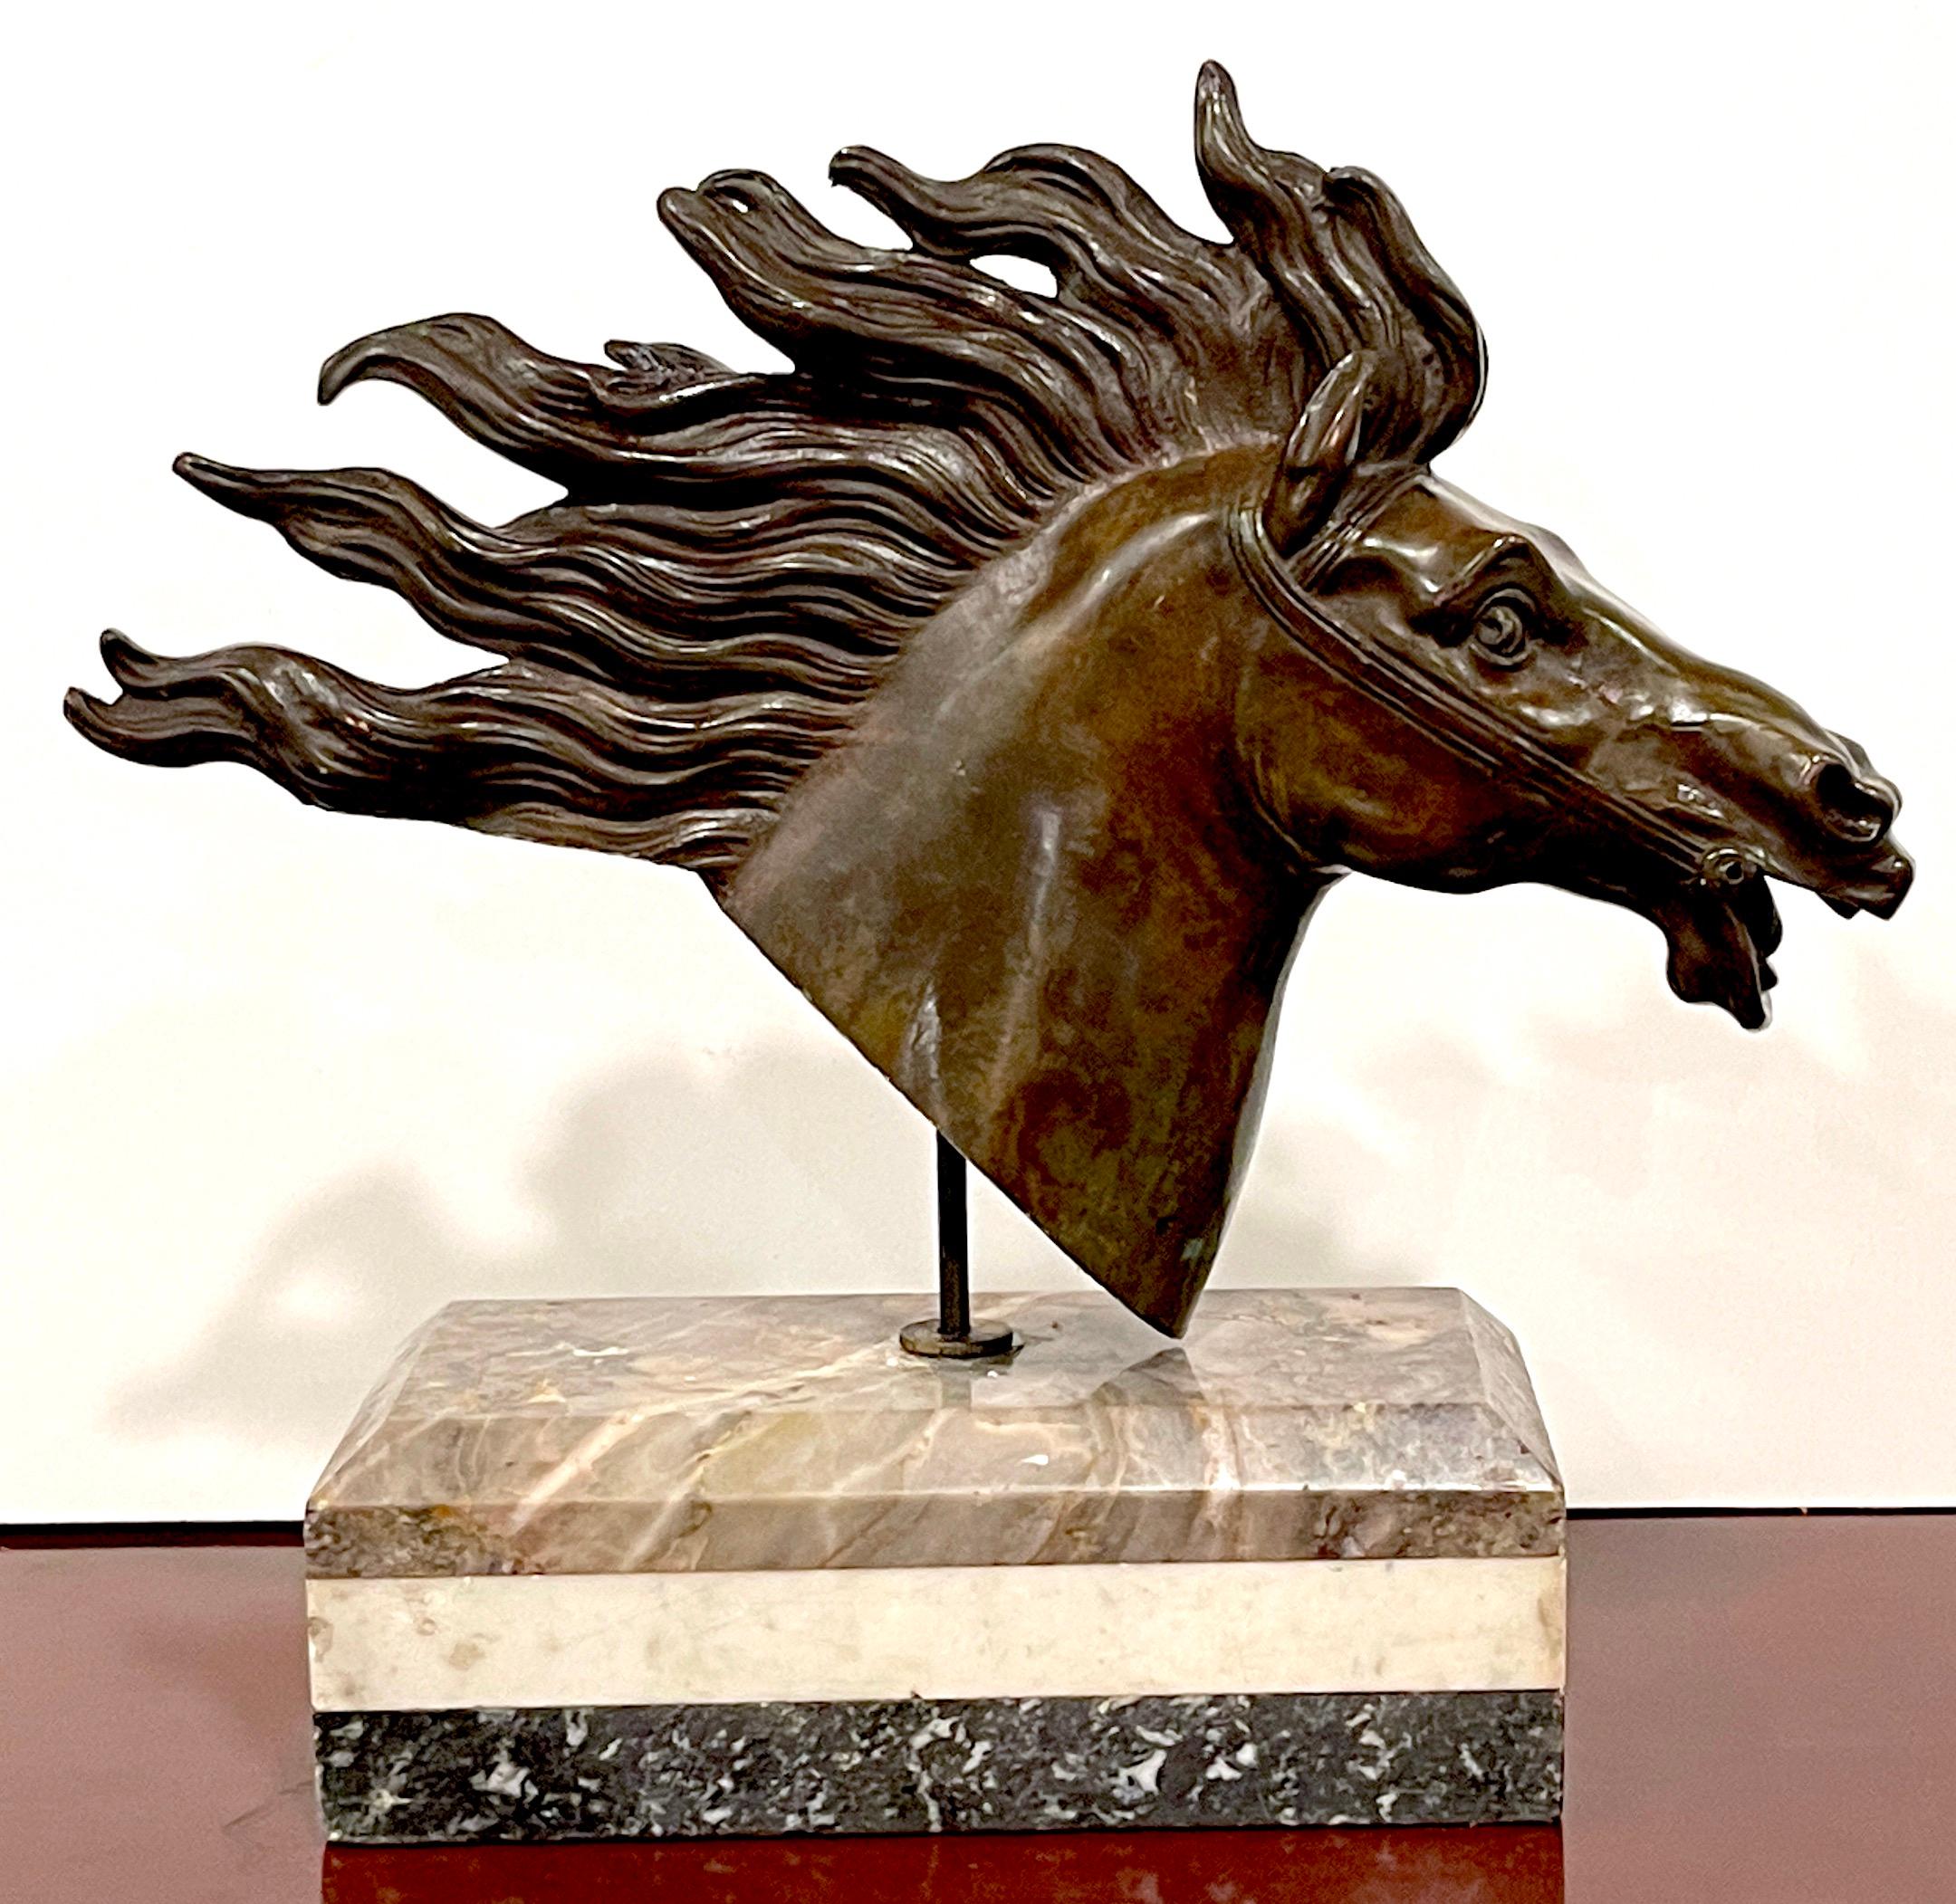 Italian 18th C Grand Tour Roman Bronze Bust of a Horse, Specimen Marble Base
Italy, Later 18th Century 
 A Italian 18th Century Grand Tour Roman Bronze Bust of a Horse, displayed on a captivating Specimen Marble Base. 

The craftsmanship of this